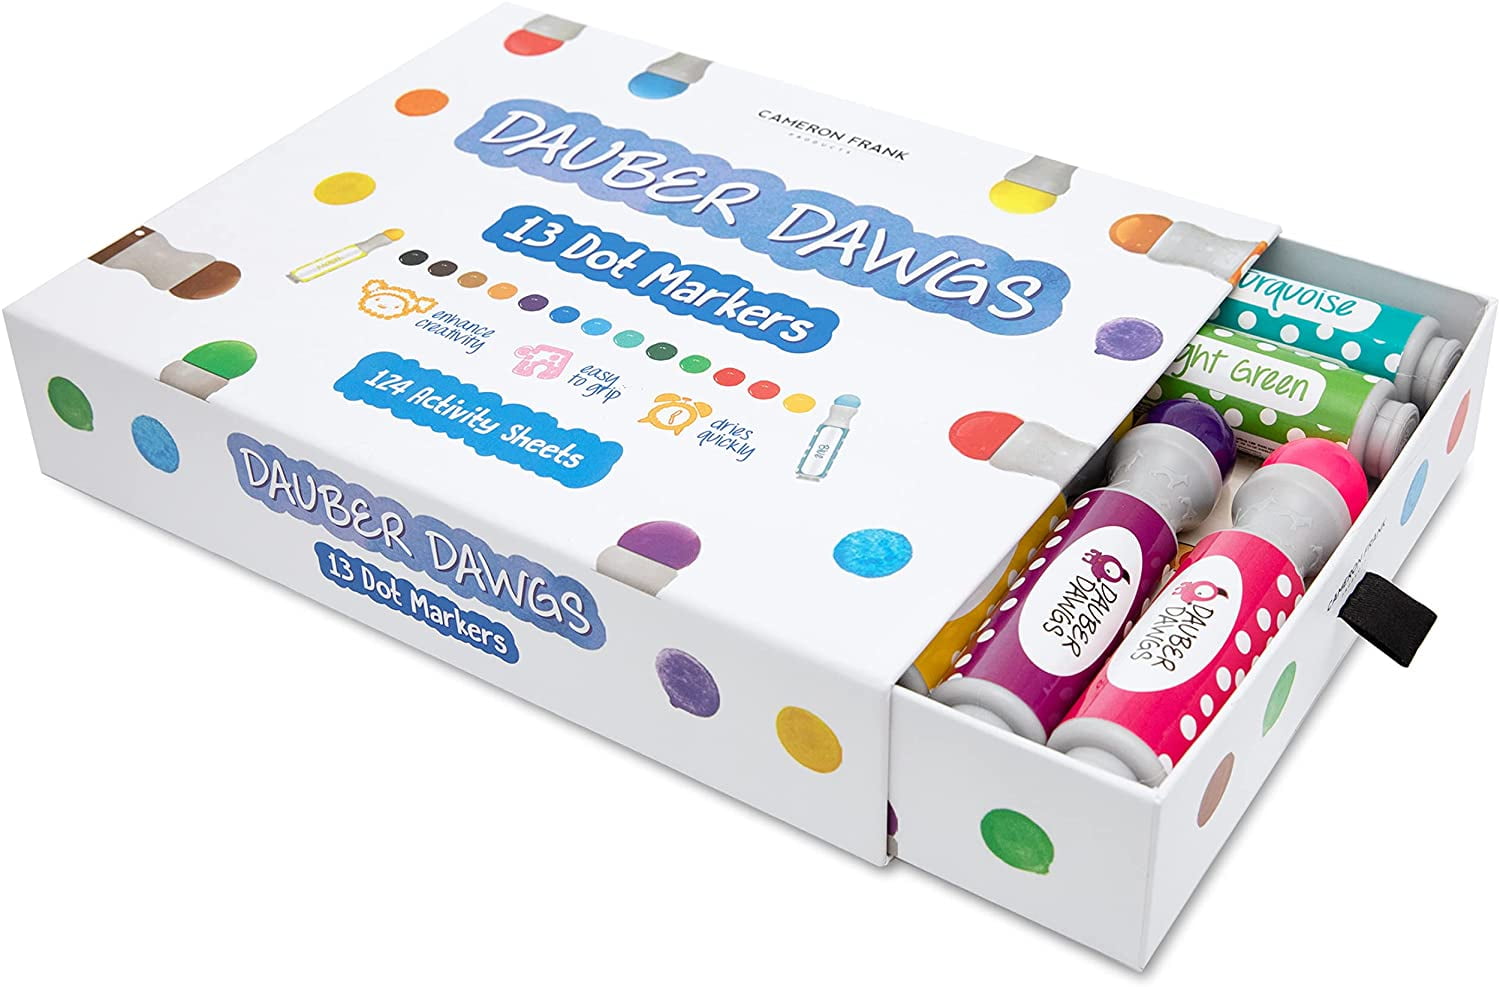 Cameron Frank Products Dot Markers for Toddlers 1-3 - Set of 8 Dauber Dawgs  Washable Dot Paints with 3 Activity Book PDFs